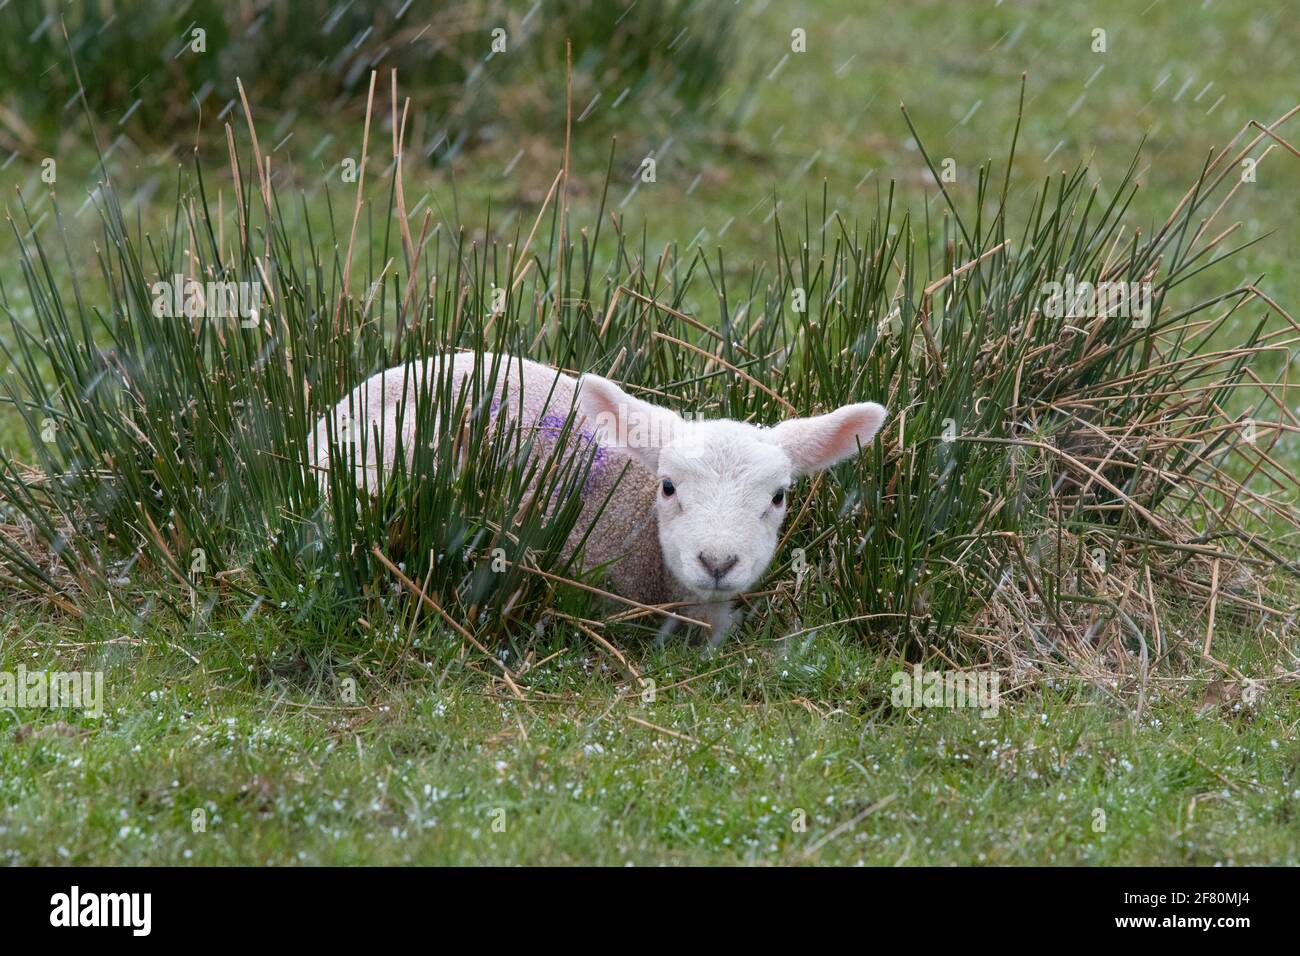 Gartness, Stirling, Scotland, UK. 10th Apr, 2021. UK weather - a lamb tucked in long grass during a late afternoon hail storm, with snow and temperatures below freezing forecast overnight Credit: Kay Roxby/Alamy Live News Stock Photo